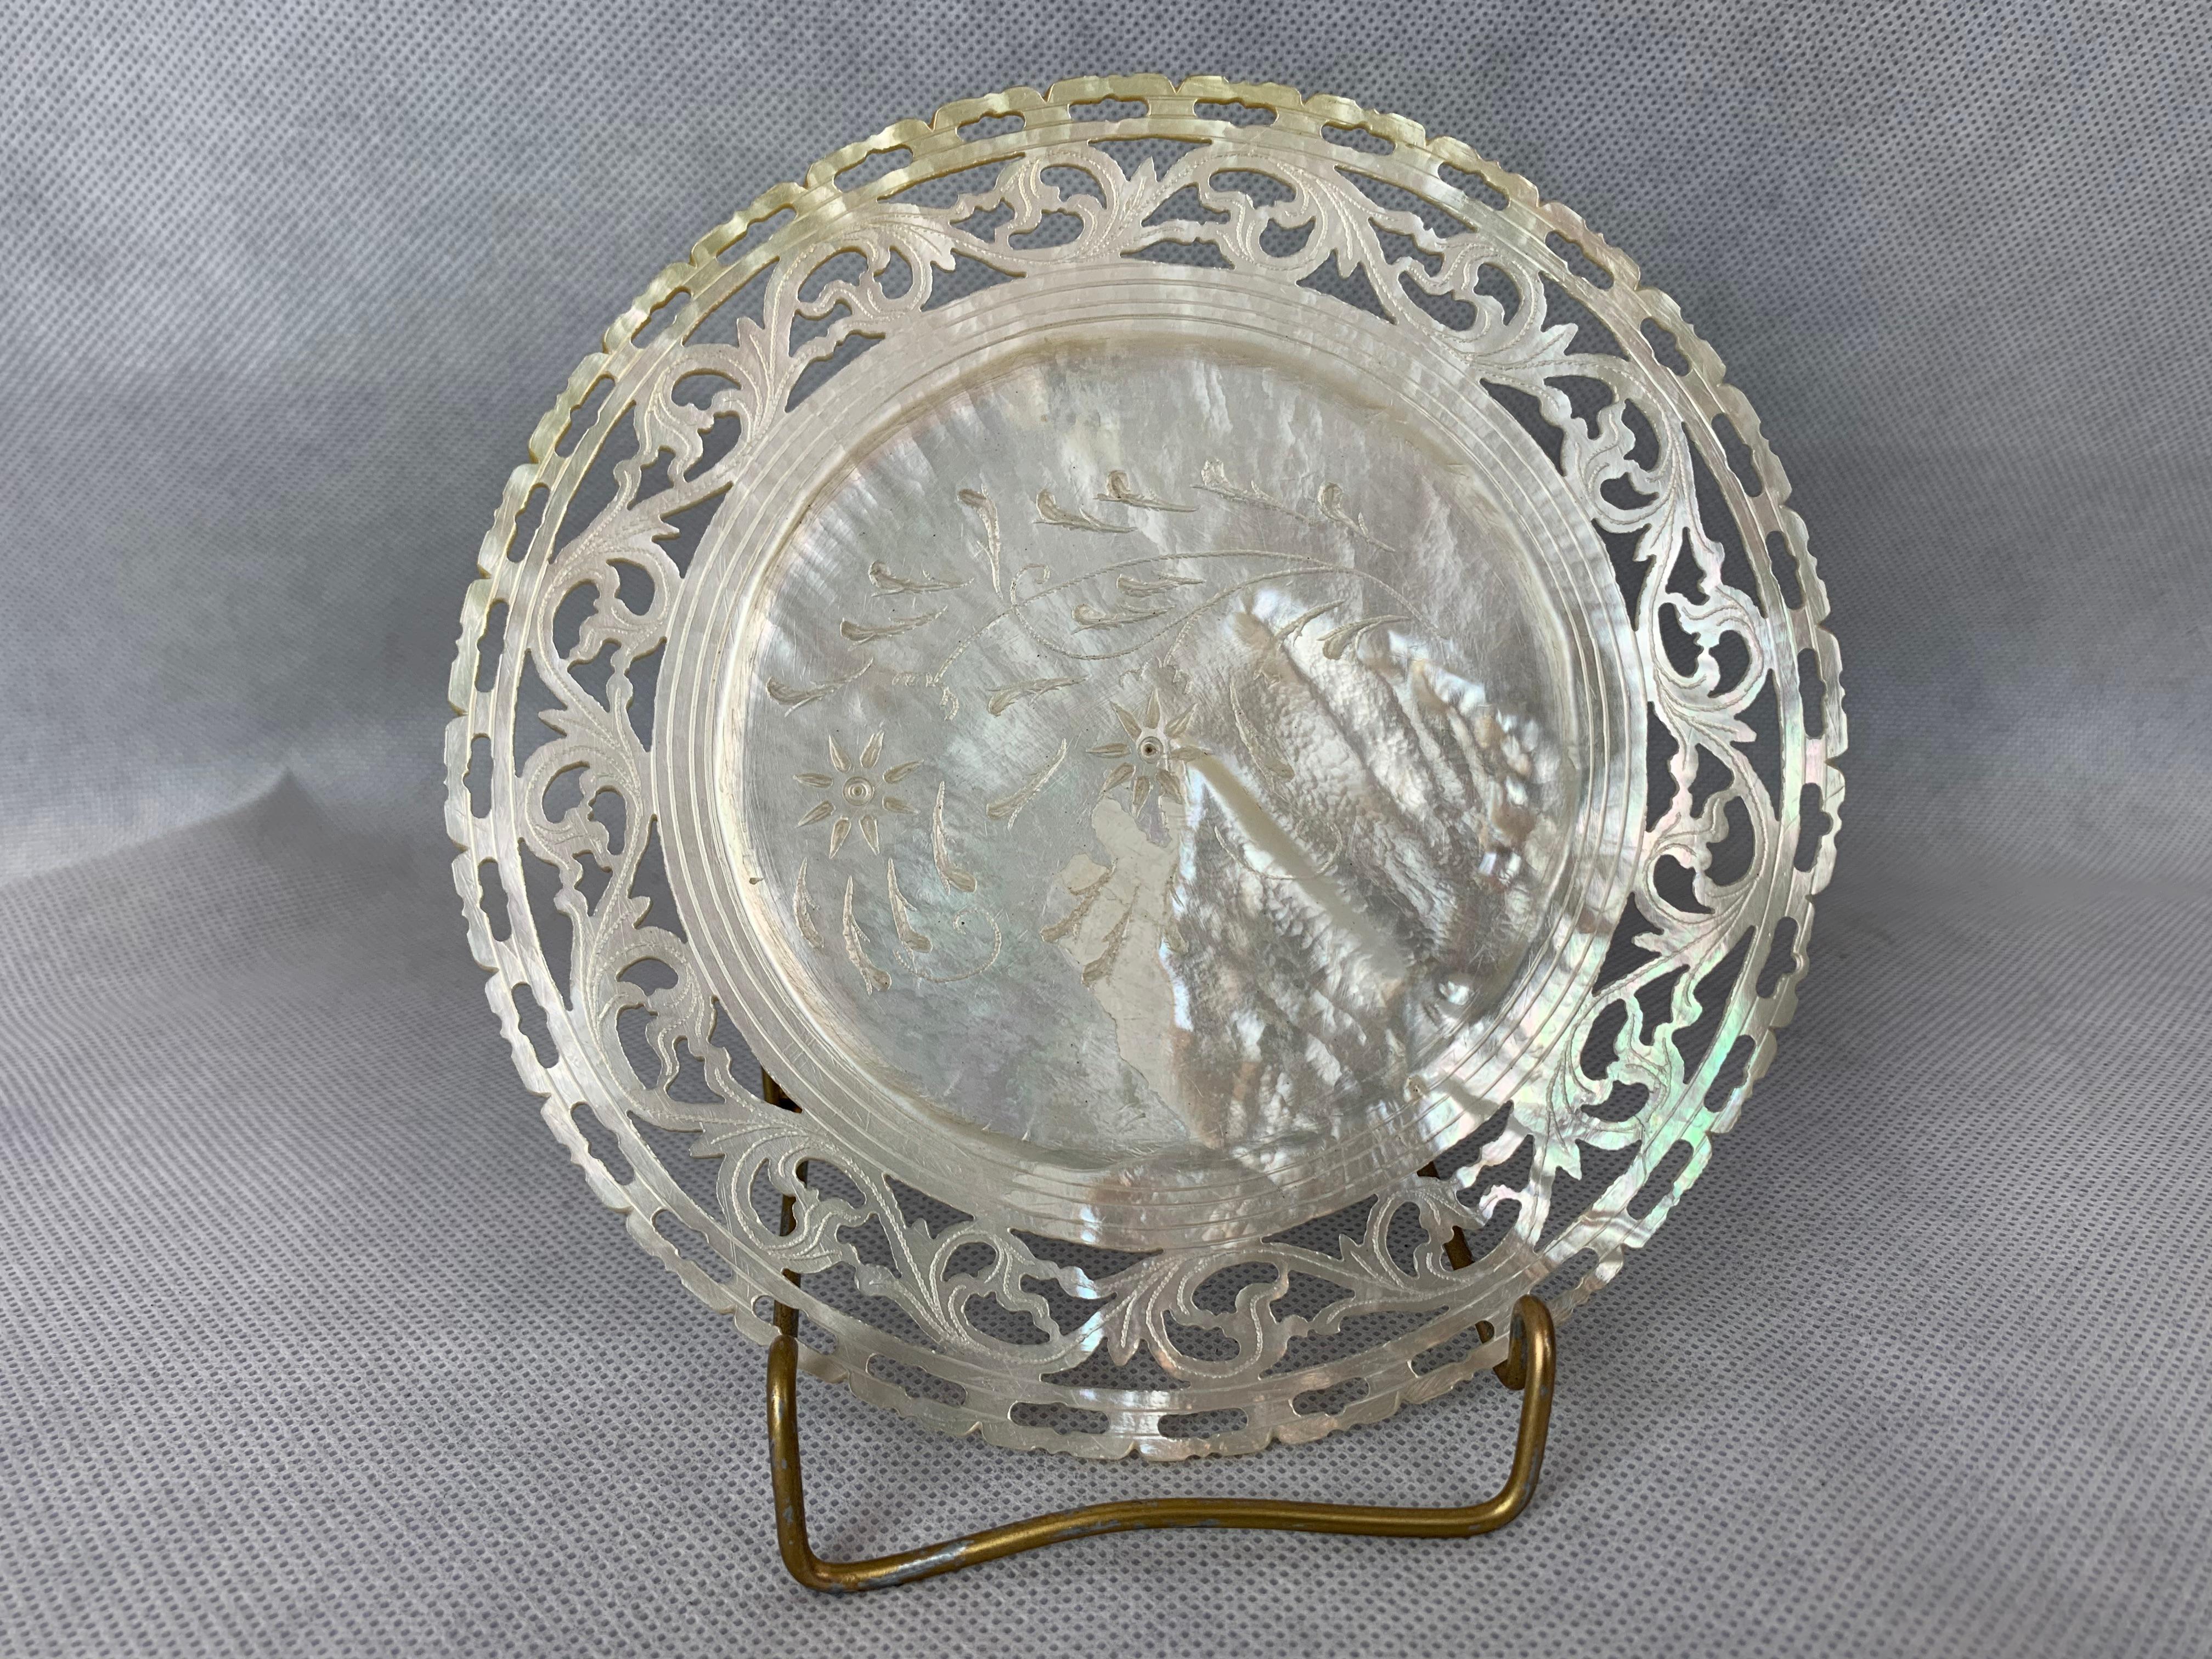 Mid-19th Century   Reticulated and Carved Mother of Pearl Caviar Dish-China Trade Period 